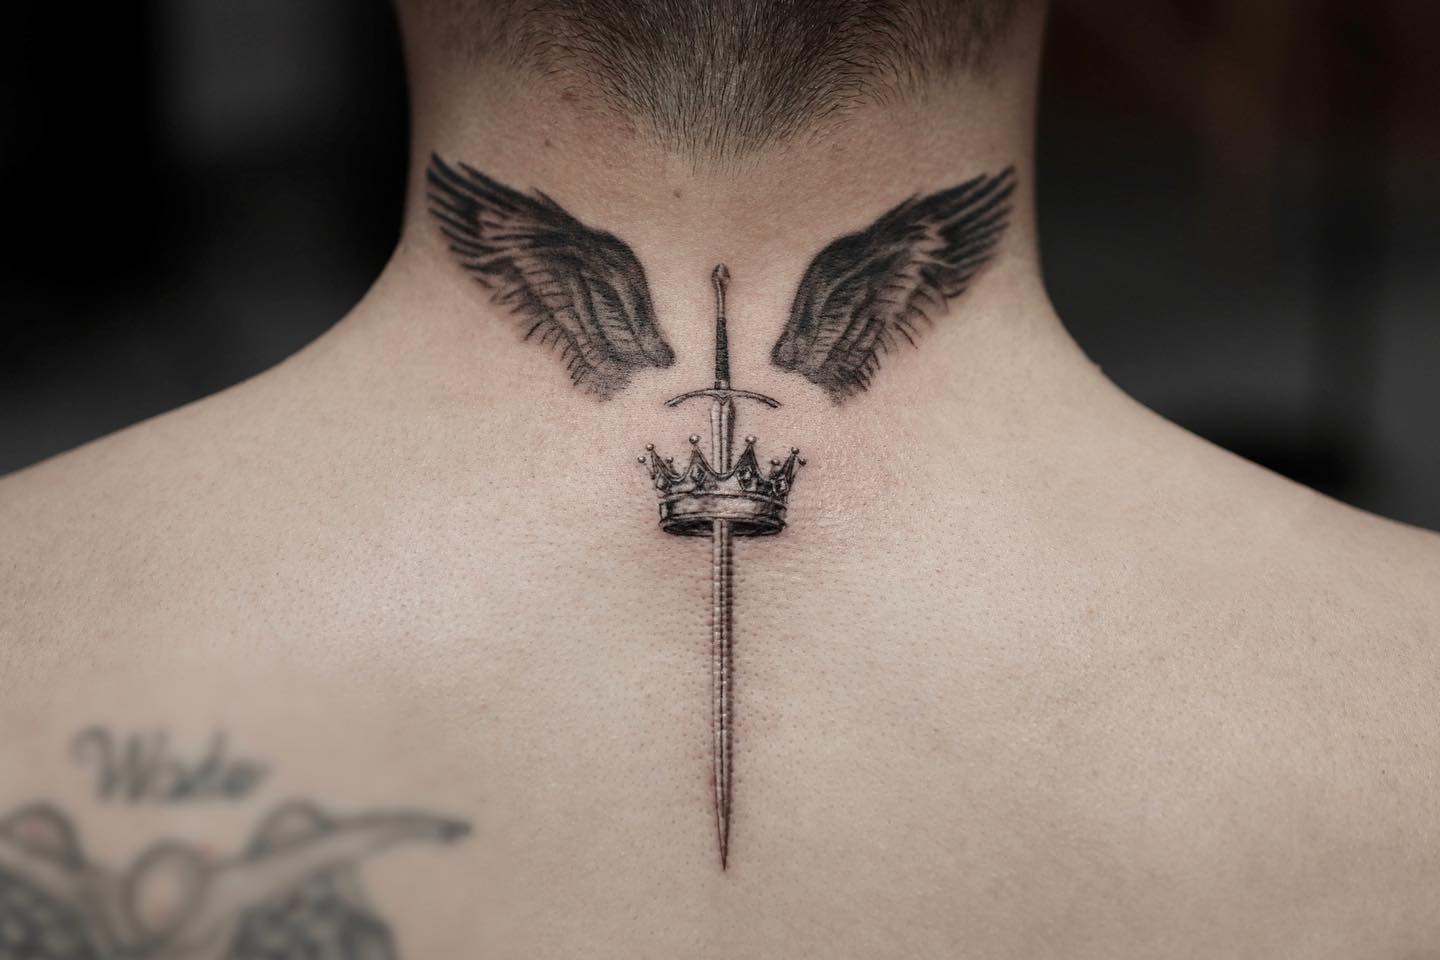 Crown Tattoos: 30 Examples, Crown Meaning & Top Designs